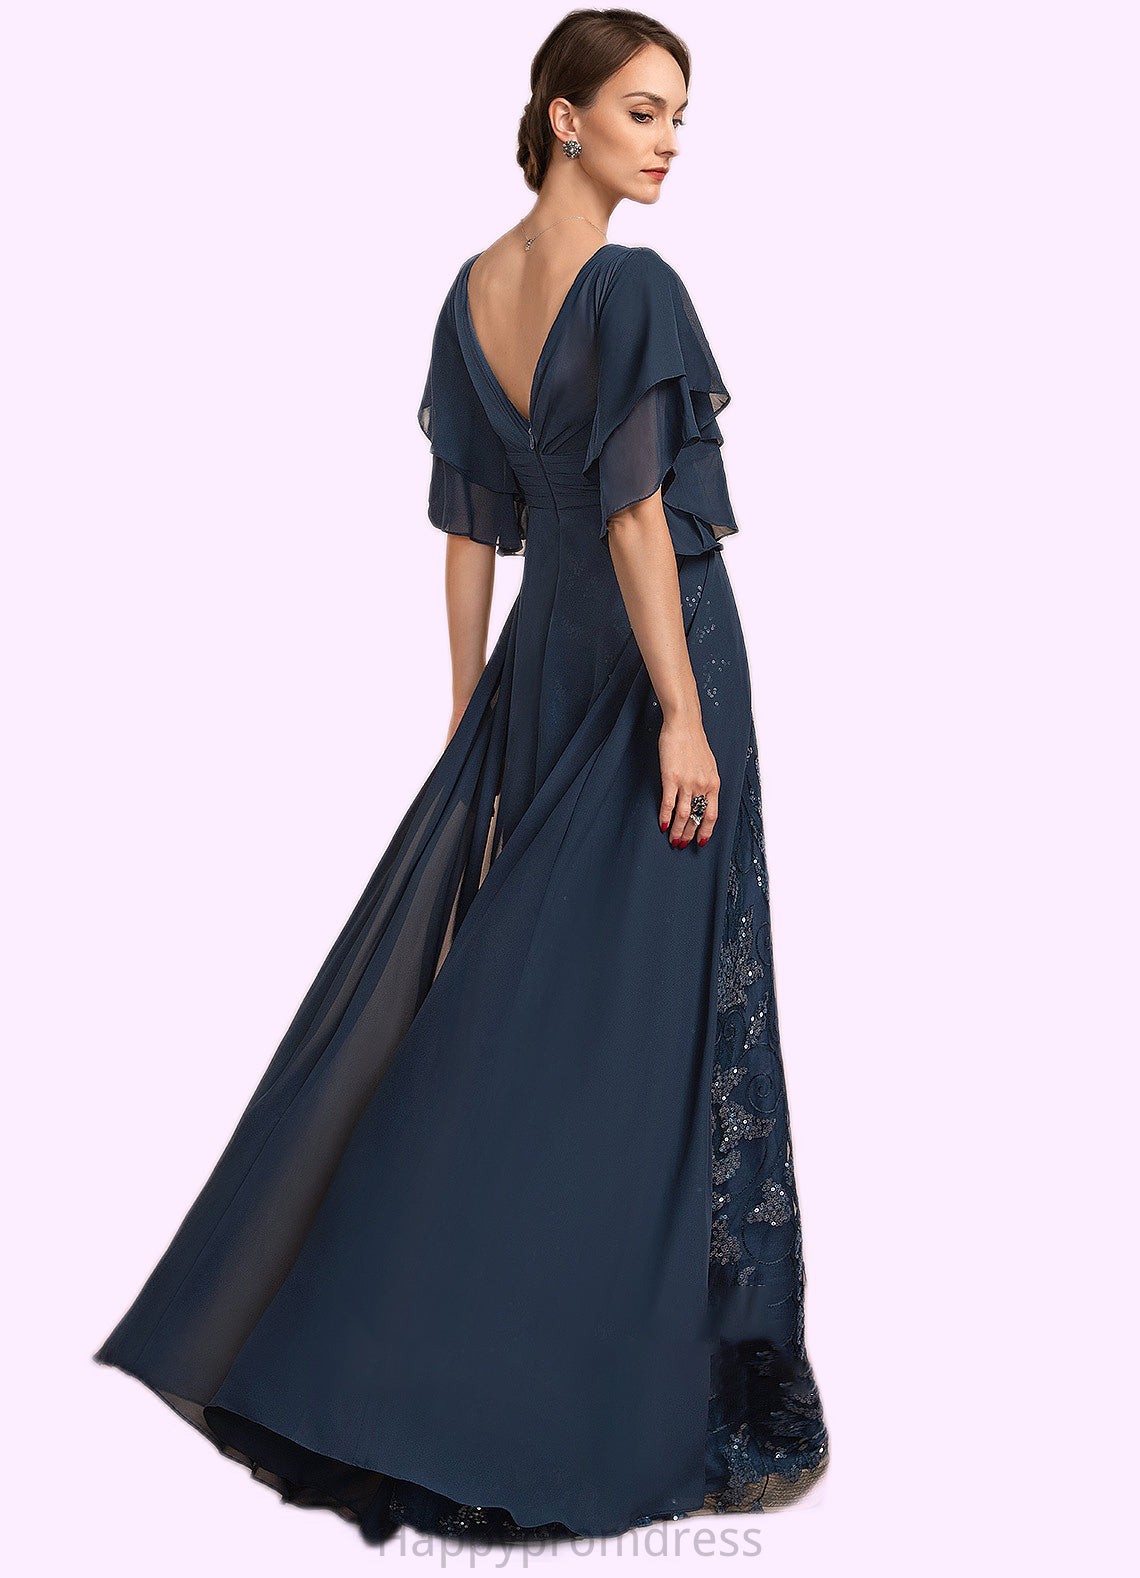 Emilie Sheath/Column V-neck Floor-Length Chiffon Lace Mother of the Bride Dress With Ruffle Sequins XXS126P0014573